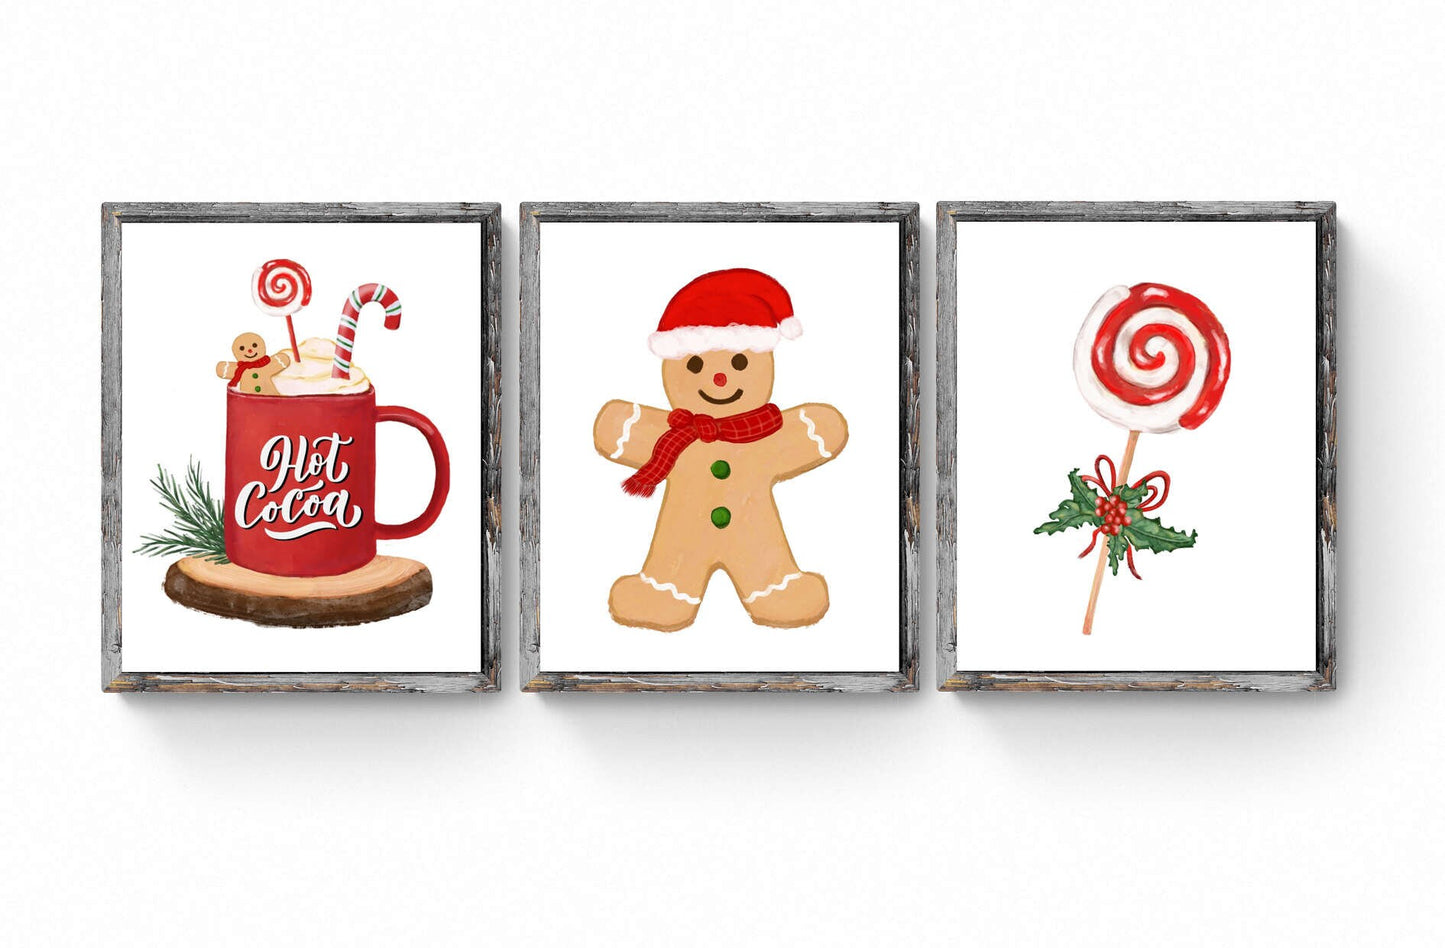 Set of 3 Christmas Prints, Hot Cocoa Painting, Winter Decor, Living Room Home Art, Holiday Wall Art, Chocolate Illustration, Cozy Wall Gift